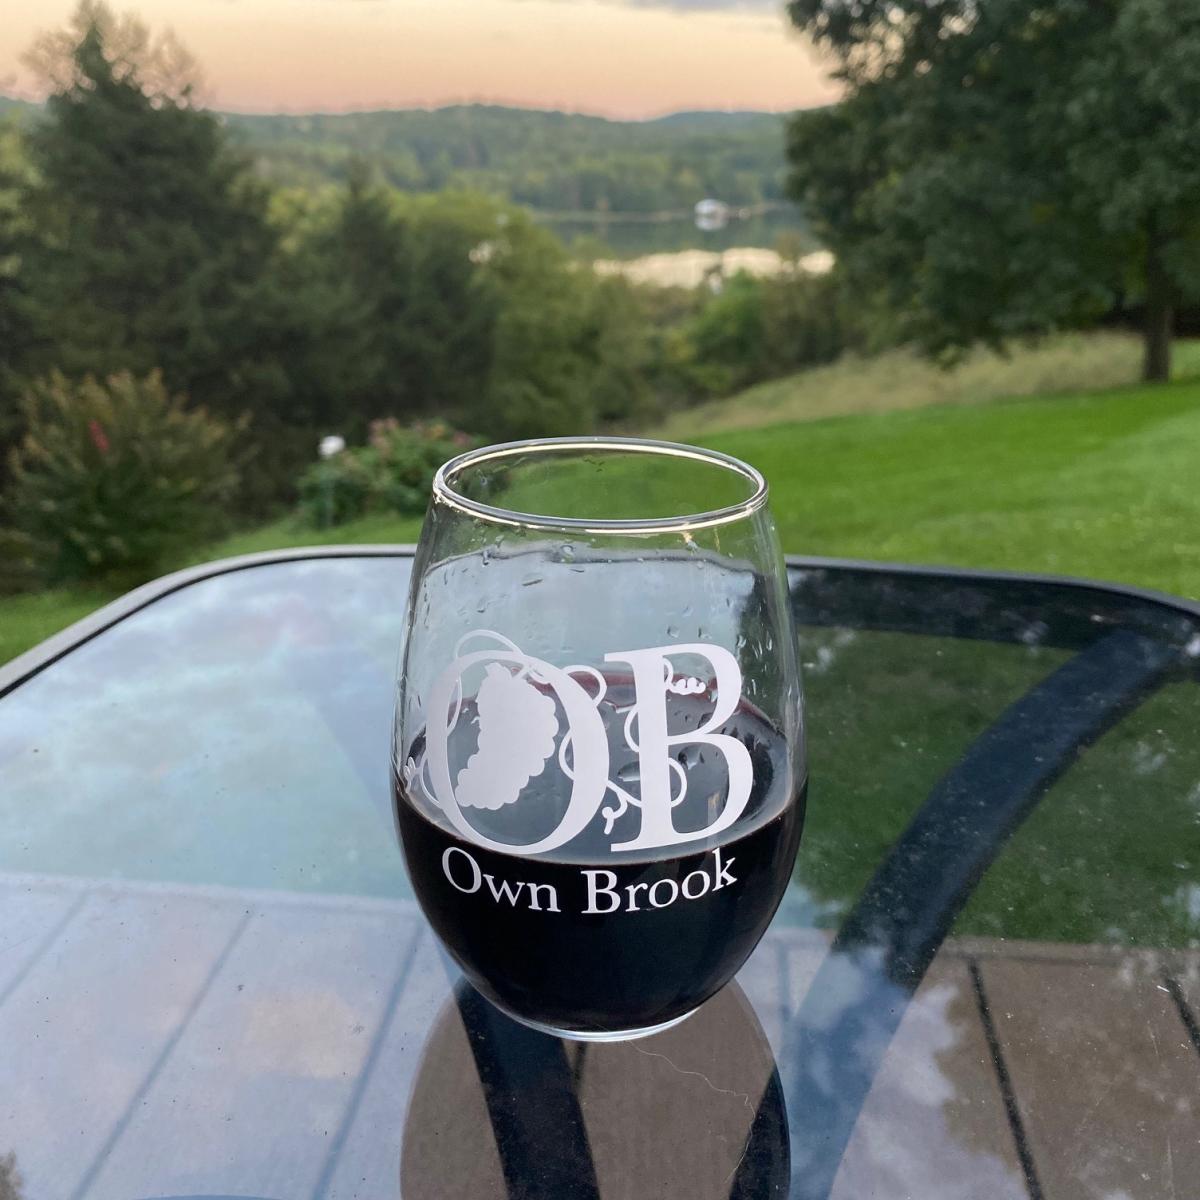 Own Brook Winery